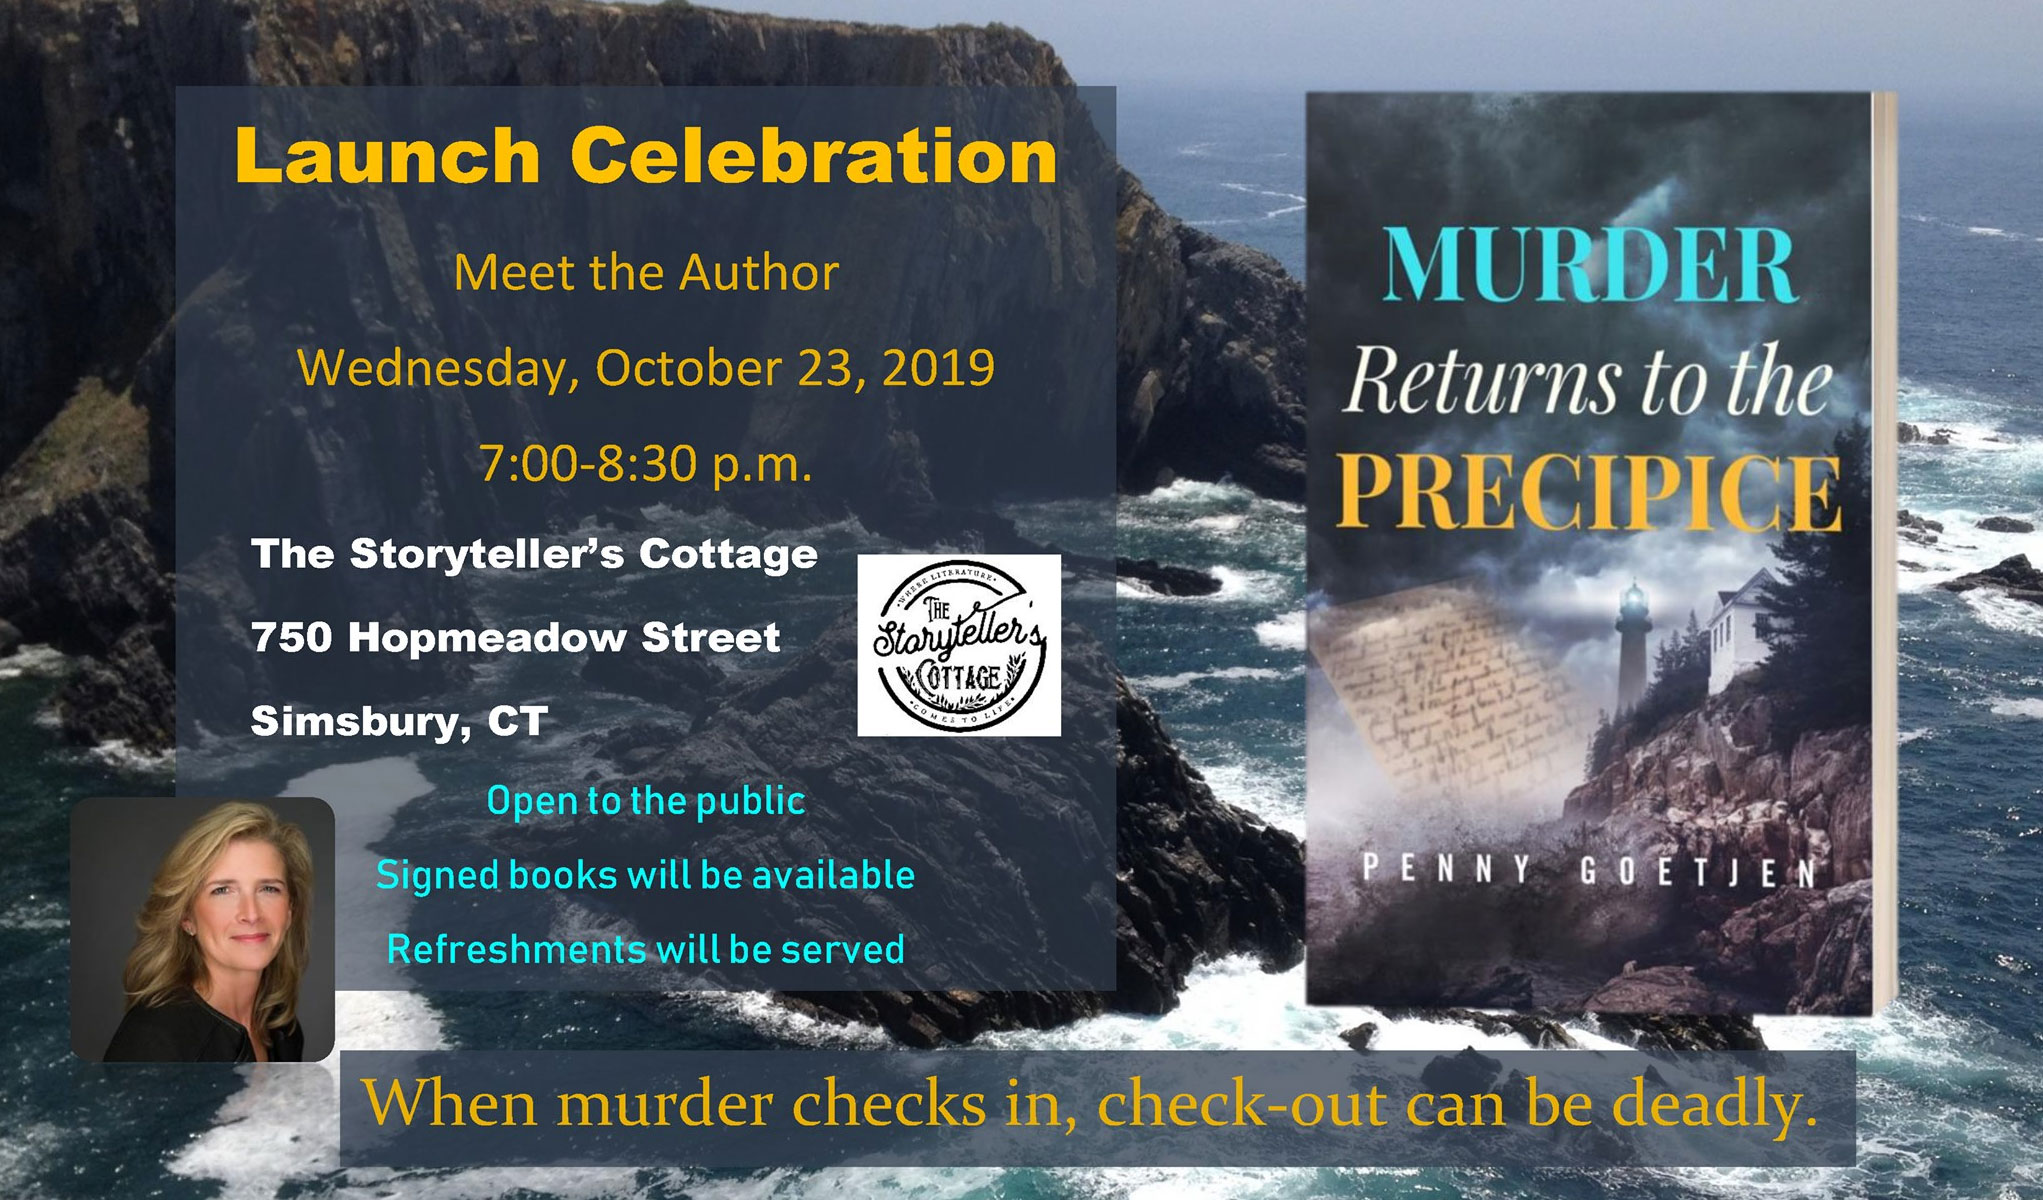 Meet the Author: Murder Returns to the Precipice at The Storyteller's Cottage